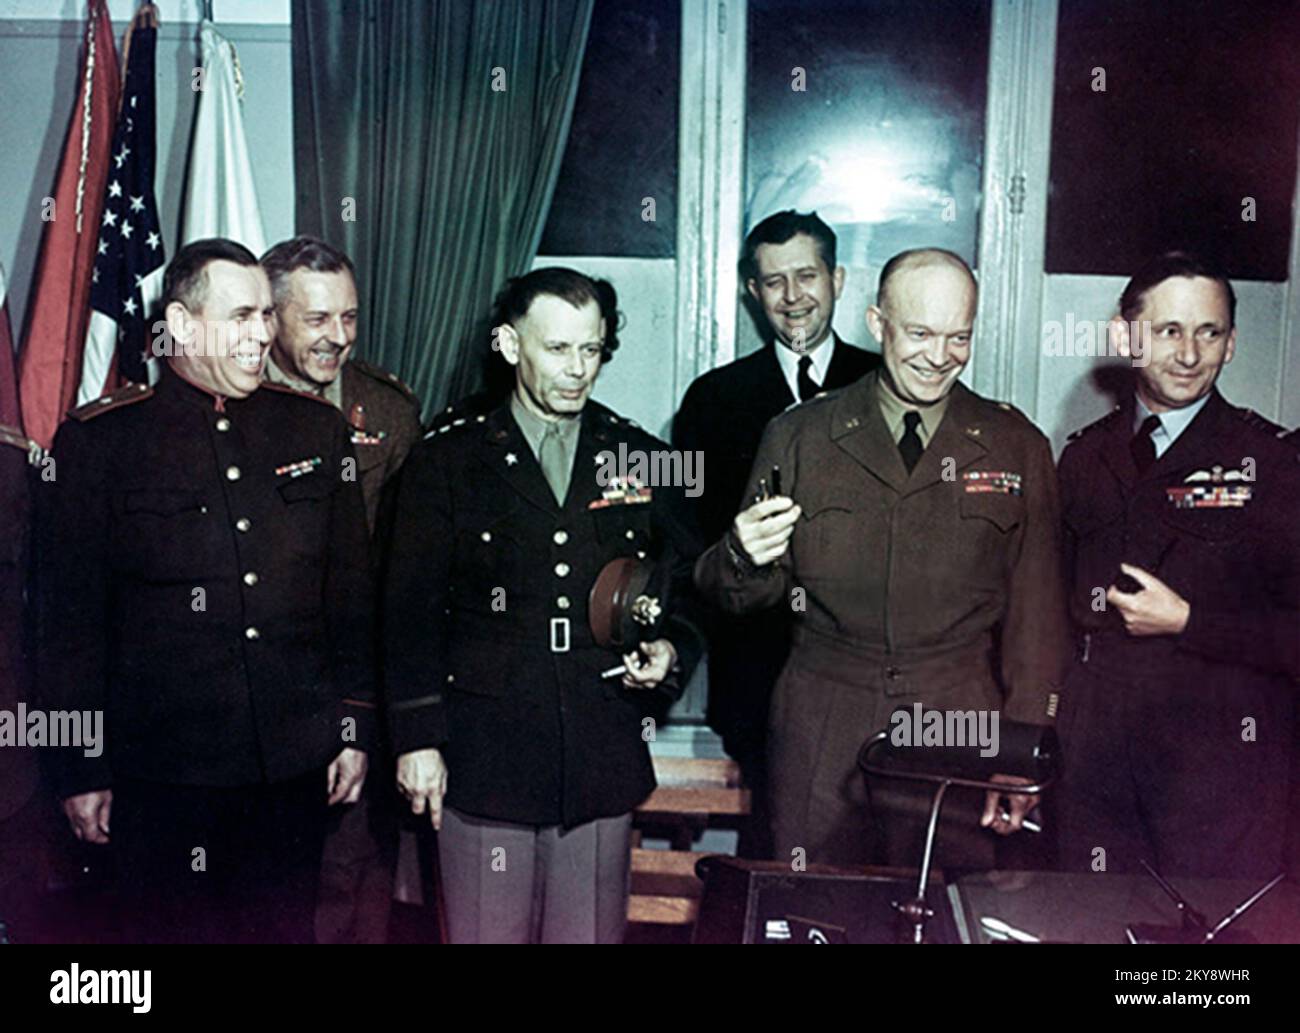 Soviet General Ivan Susloparov , British General Frederick E Morgan, US Army Lieutenant General Walter Bedell Smith ), US Navy Captain Harry C Butcher , US Army General Dwight Eisenhower  and British Marshal of the Royal Air Force Arthur Tedder as they celebrate soon after the German surrender during World War II, Rheims, France, May 7, 1945. Stock Photo